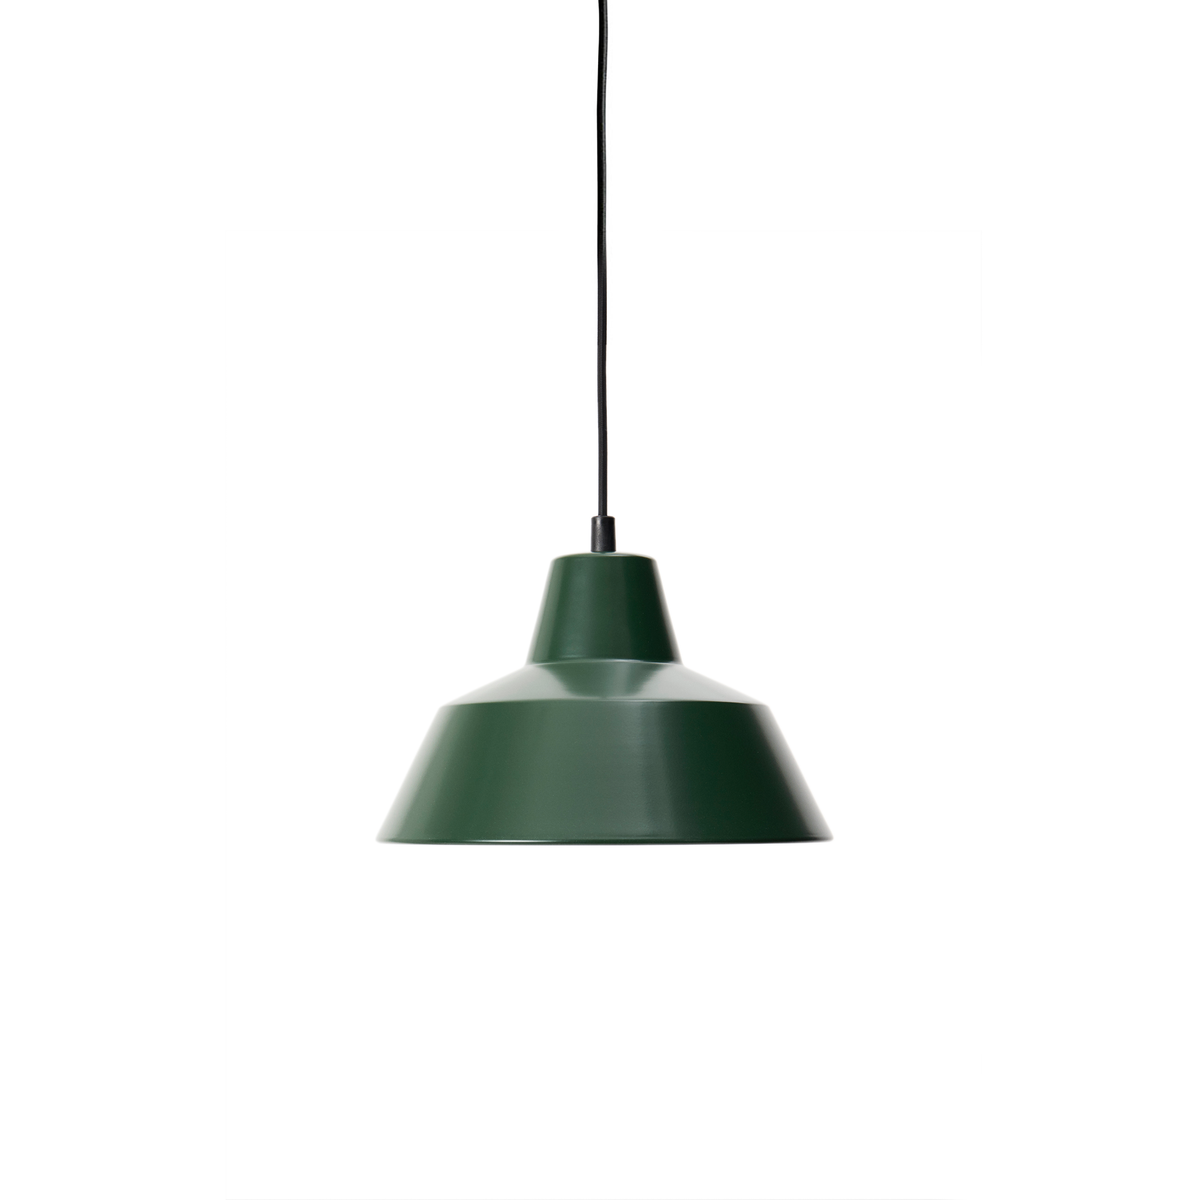 Made by Hand, Workshop Pendant Lamp W2, Racing Green, Pendant,